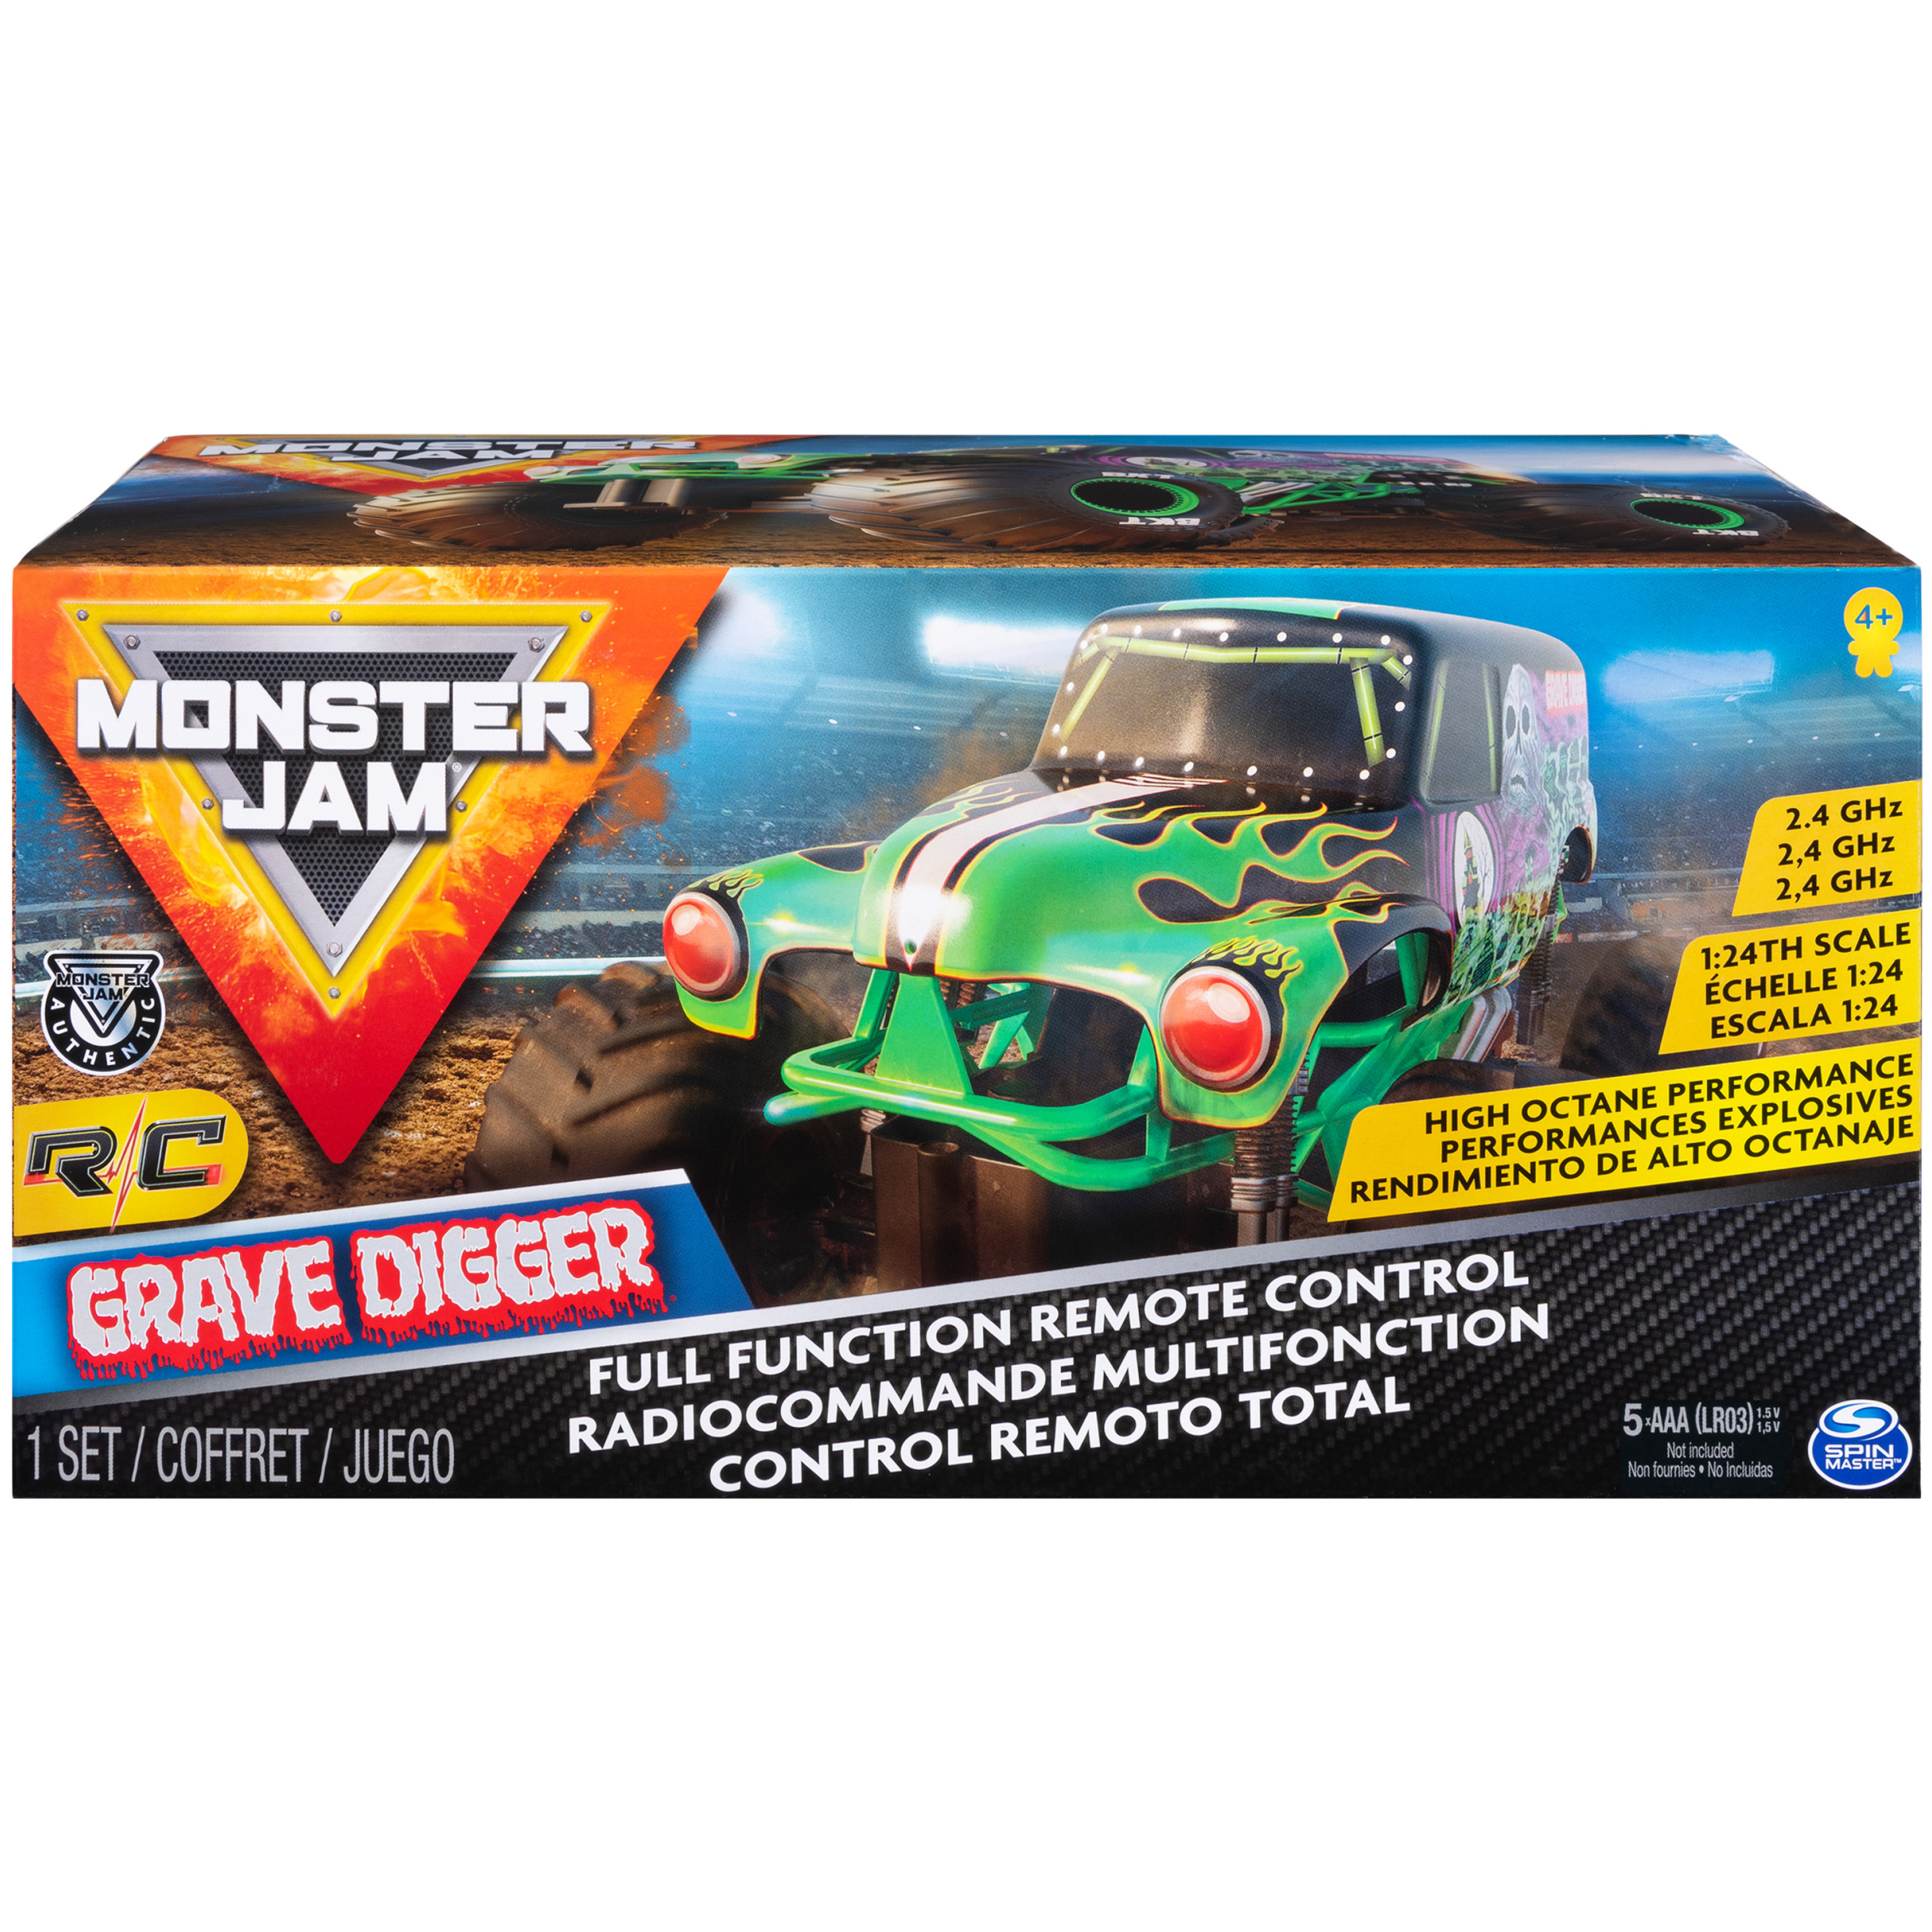 Monster Jam, Official Grave Digger Remote Control Monster Truck, 1:24 Scale, 2.4 GHz, Kids Toys for Boys and Girls Ages 4 and up - image 3 of 7